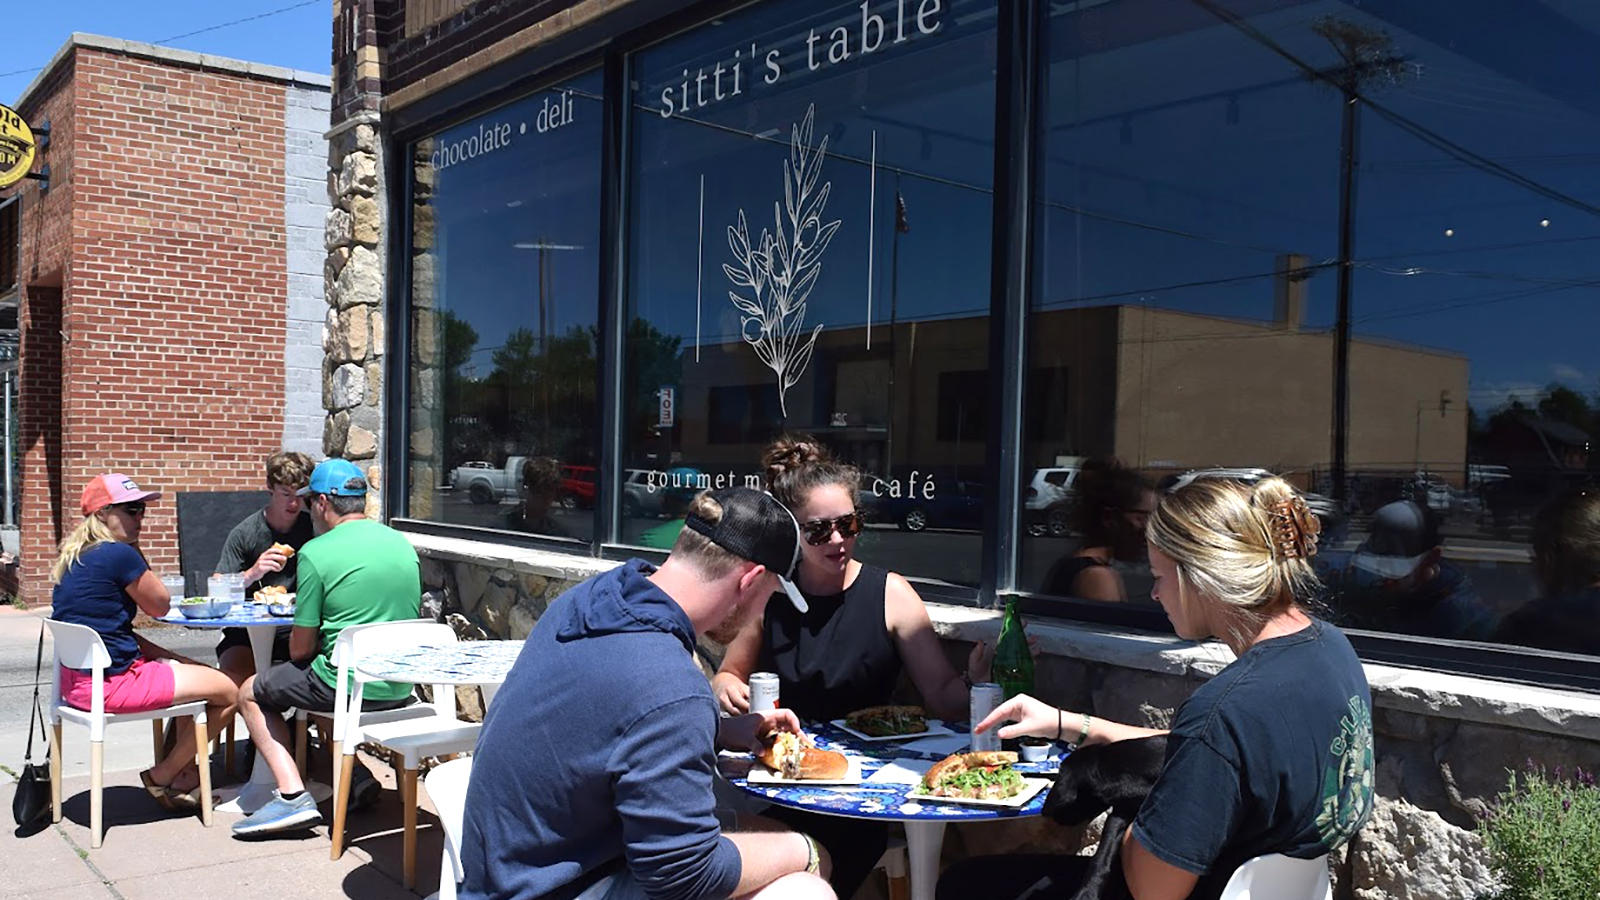 Sitti's Table In Cody Latest Wyoming Joint Featured On 'Diners